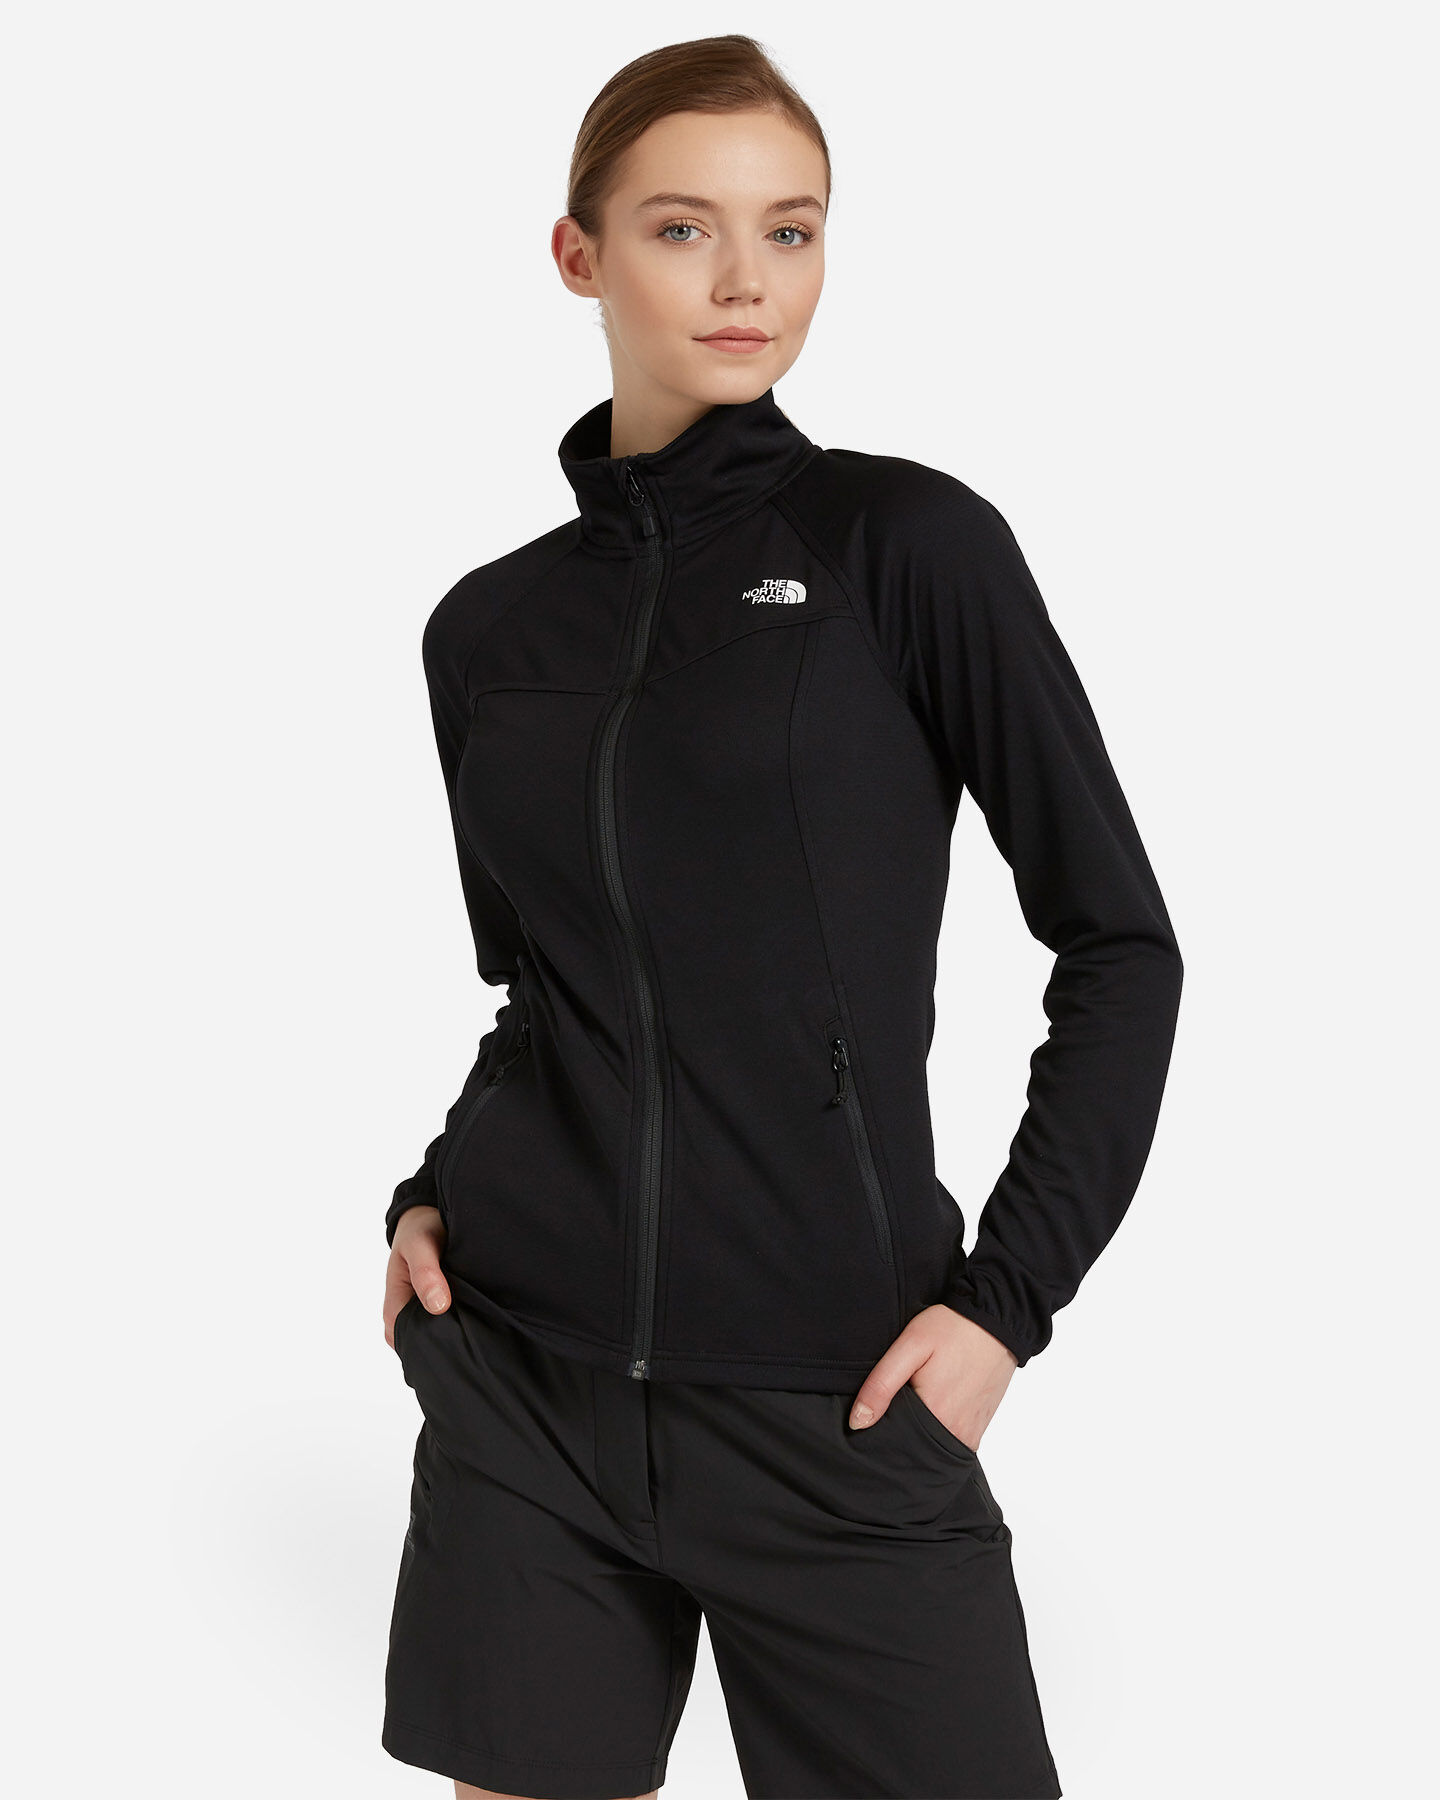  Pile THE NORTH FACE EXTENT III W S5181579|JK3|XS scatto 0